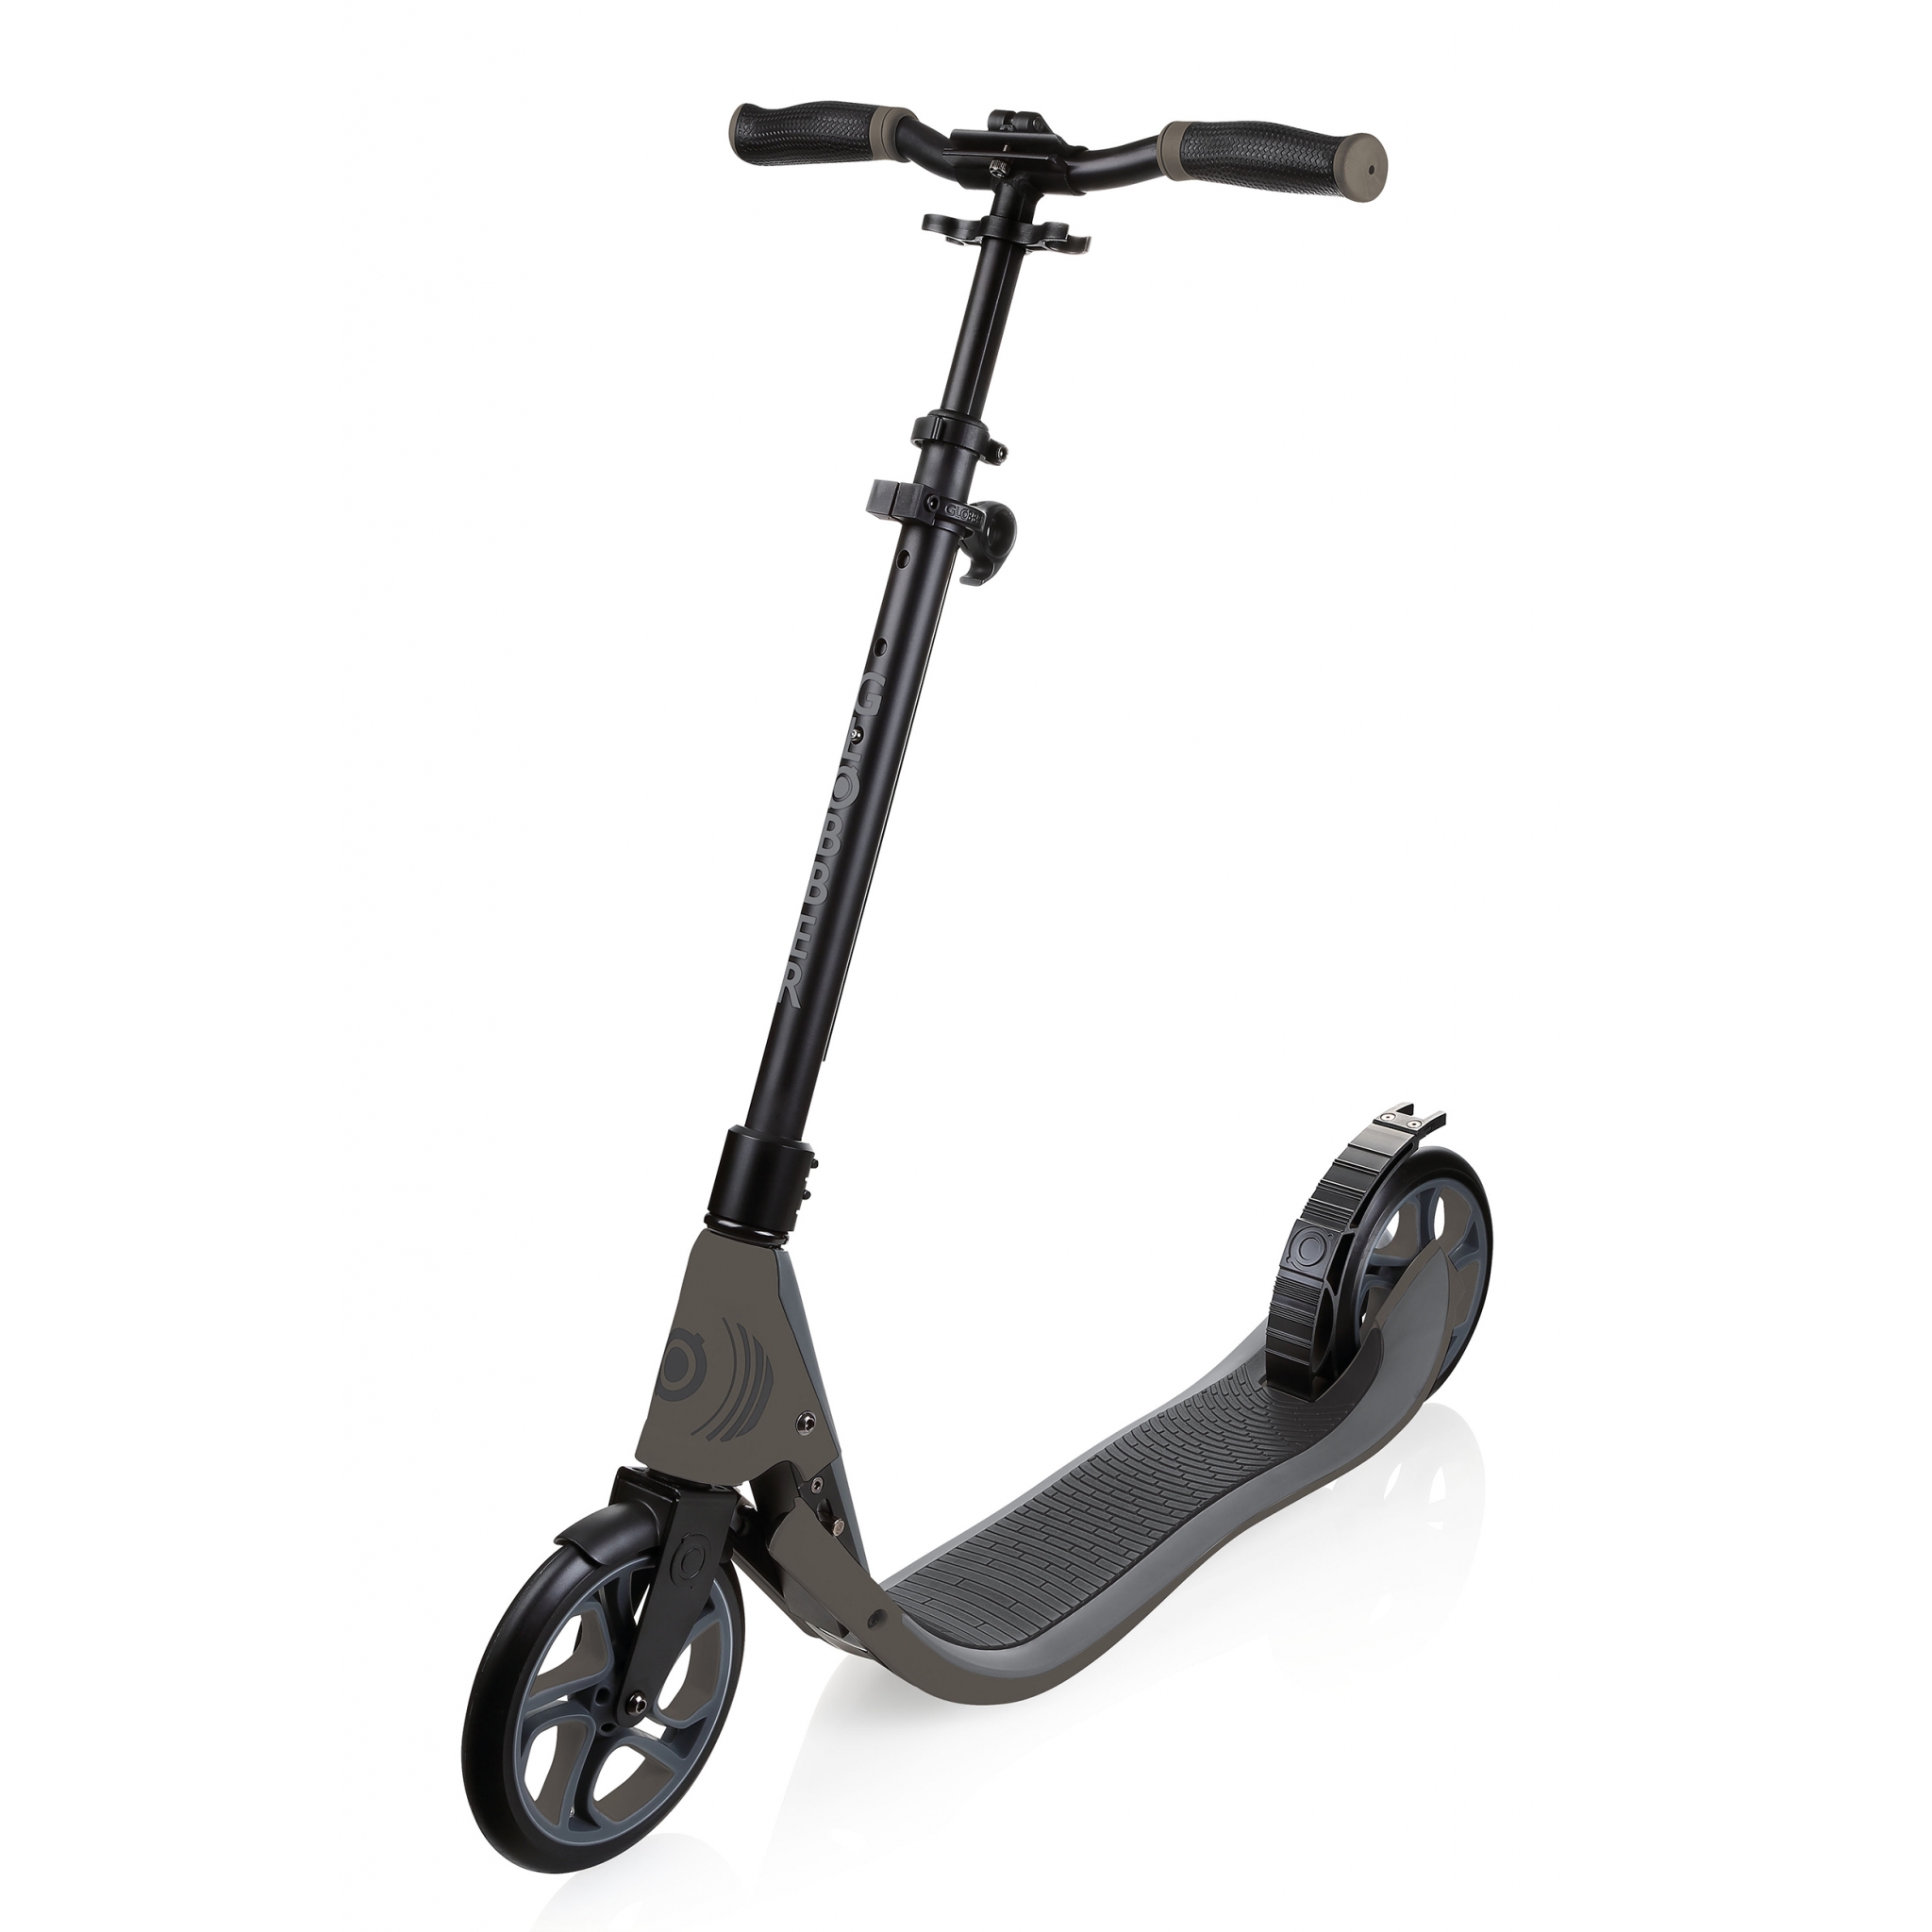 2-wheel foldable scooter for adults - Globber ONE NL 205 1